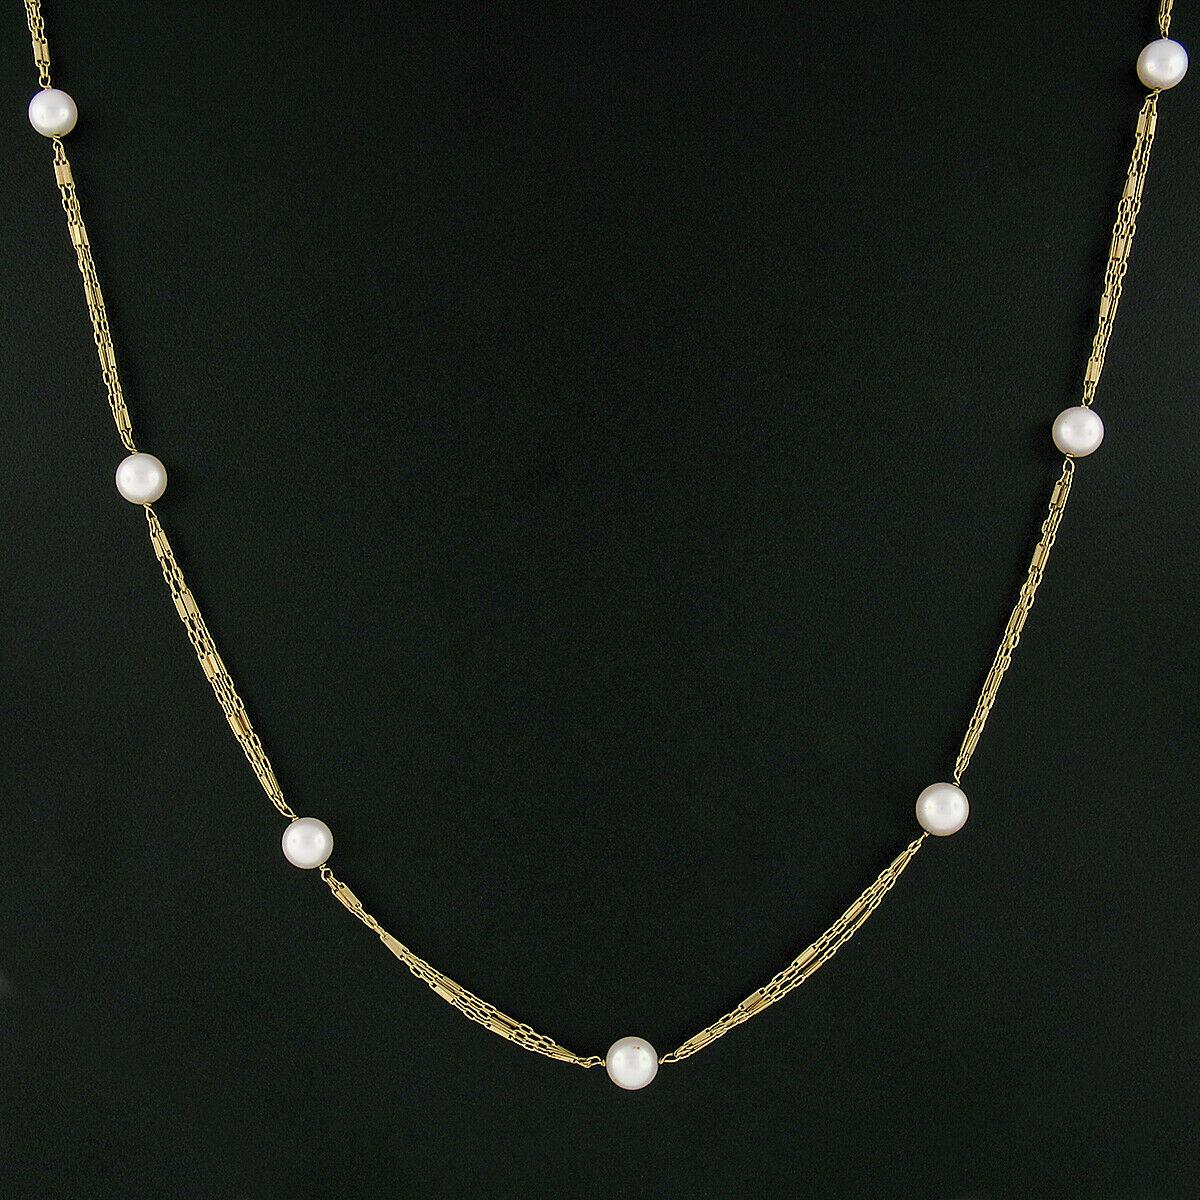 triple strand gold chain necklace